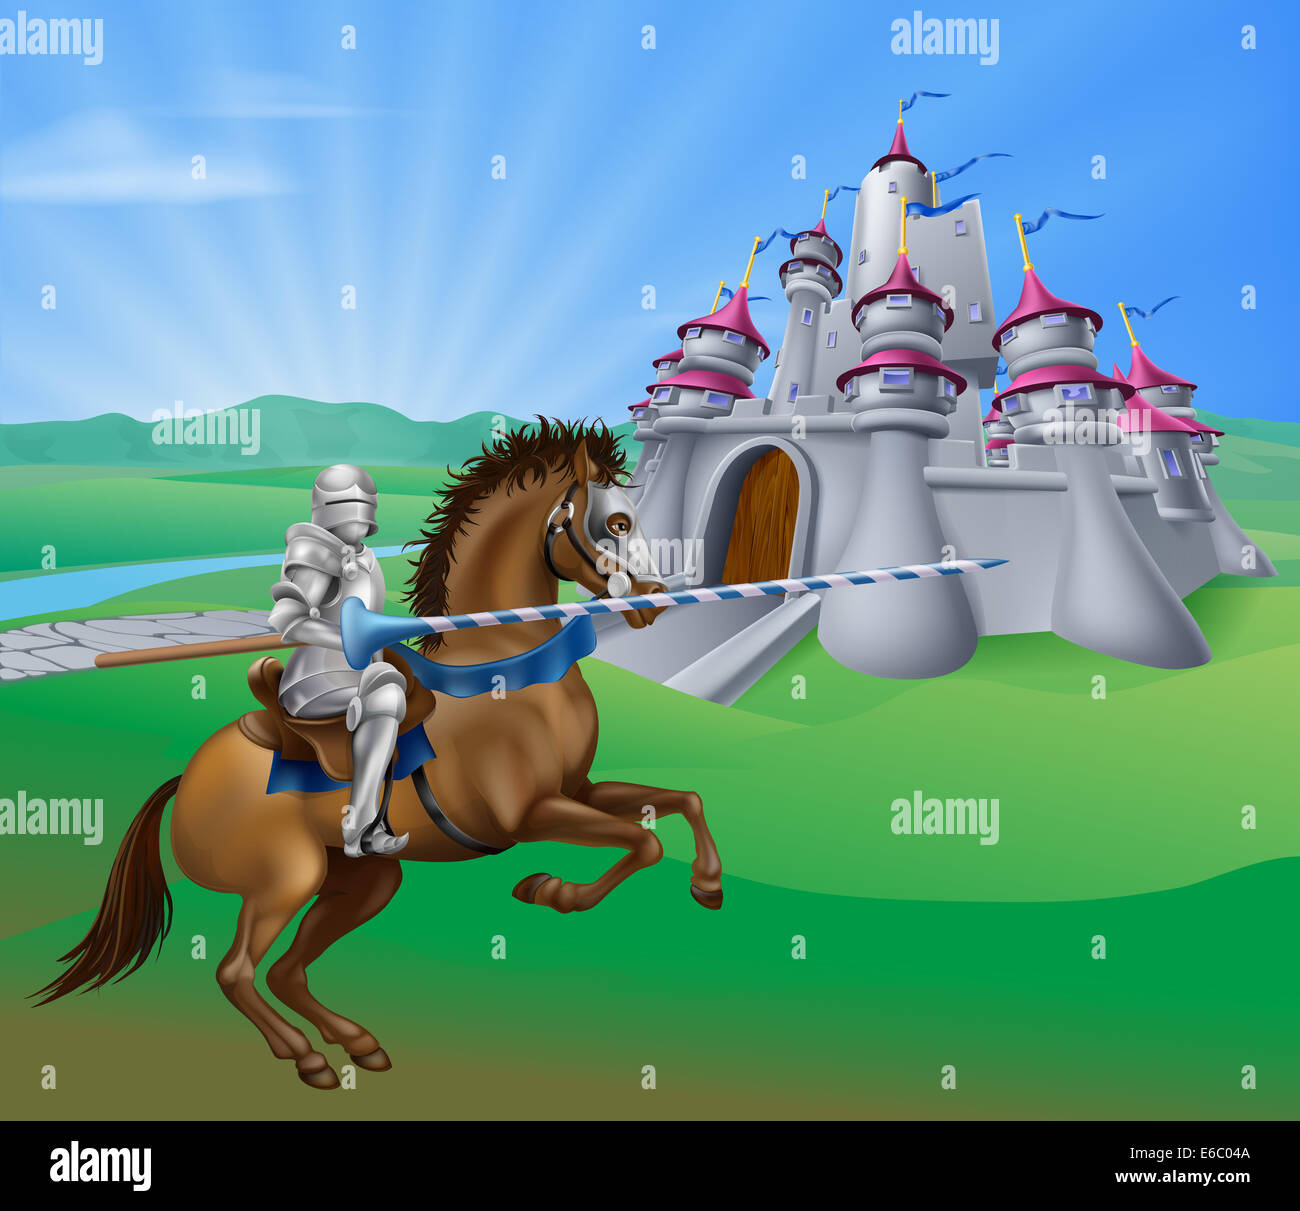 An illustration of a jousting knight with lance on his horse and a fantasy fairytale medieval castle in a landscape of a field o Stock Photo